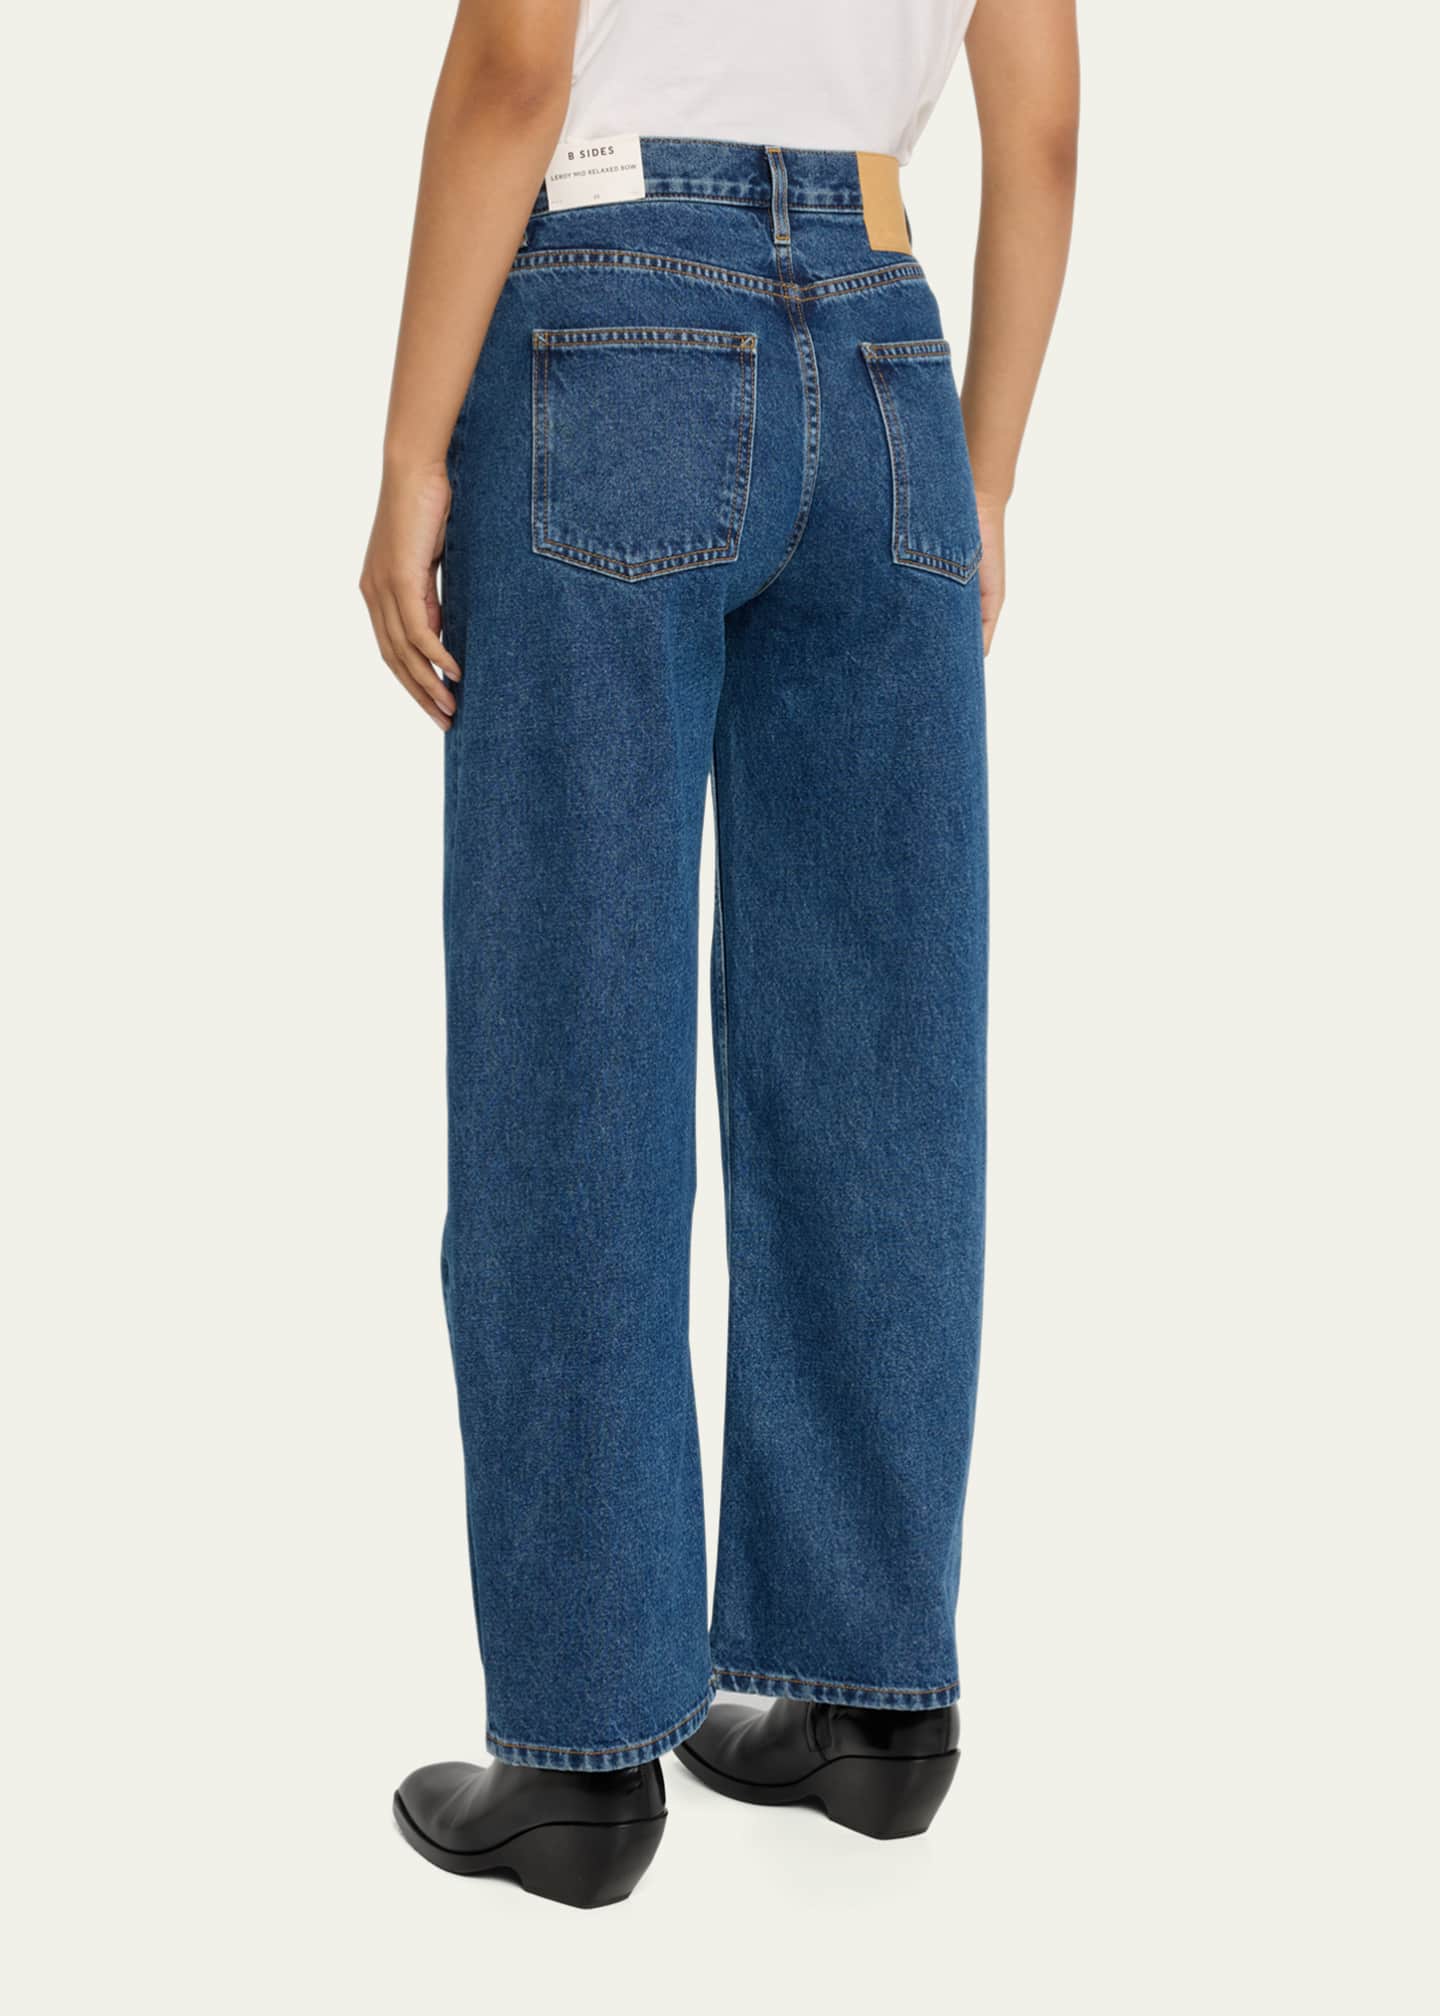 B SIDES Leroy Mid-Rise Relaxed Bow-Leg Jeans - Bergdorf Goodman